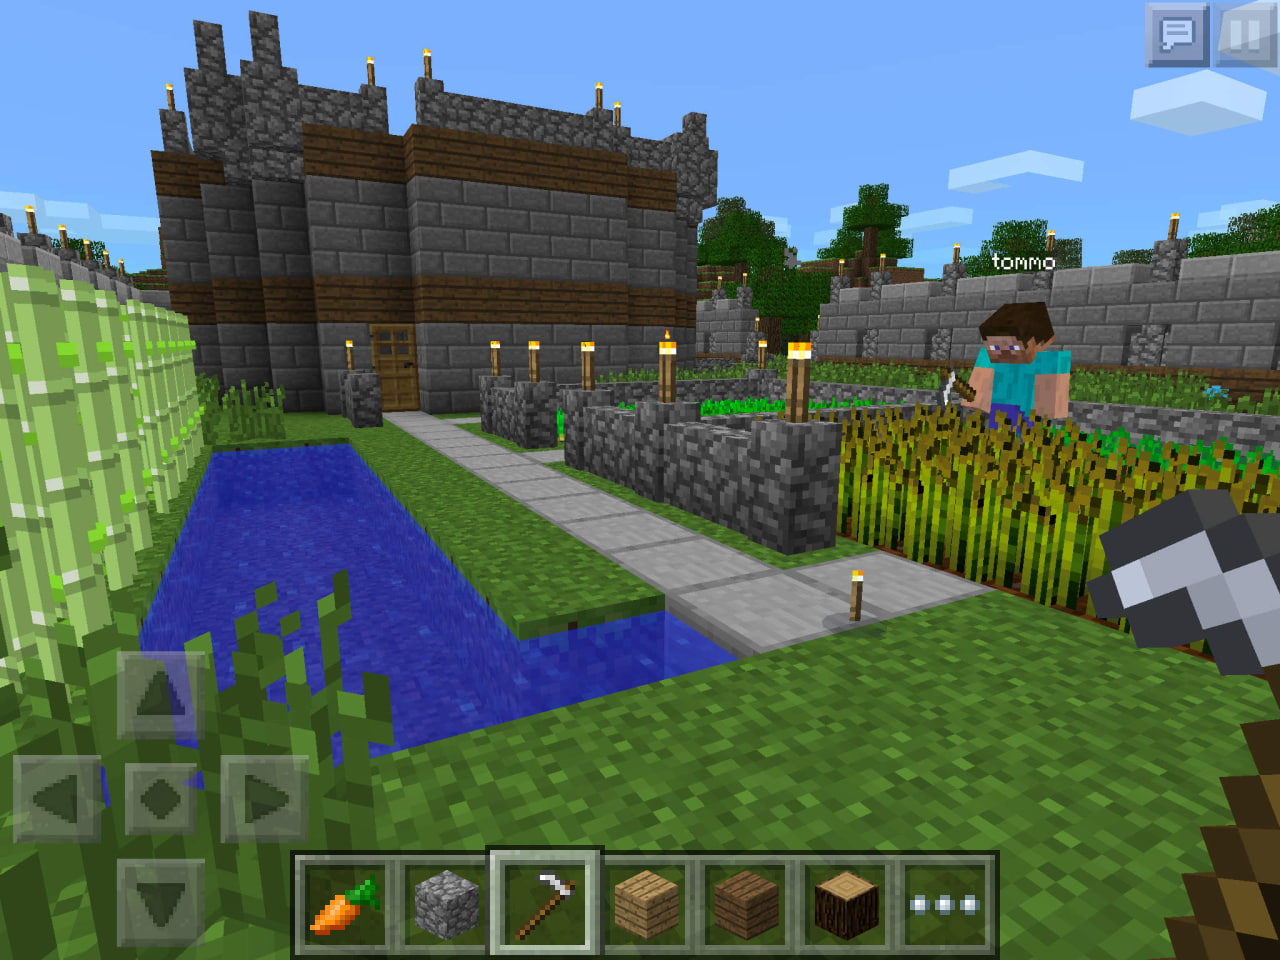 Highly anticipated Minecraft - Pocket Edition update with infinite